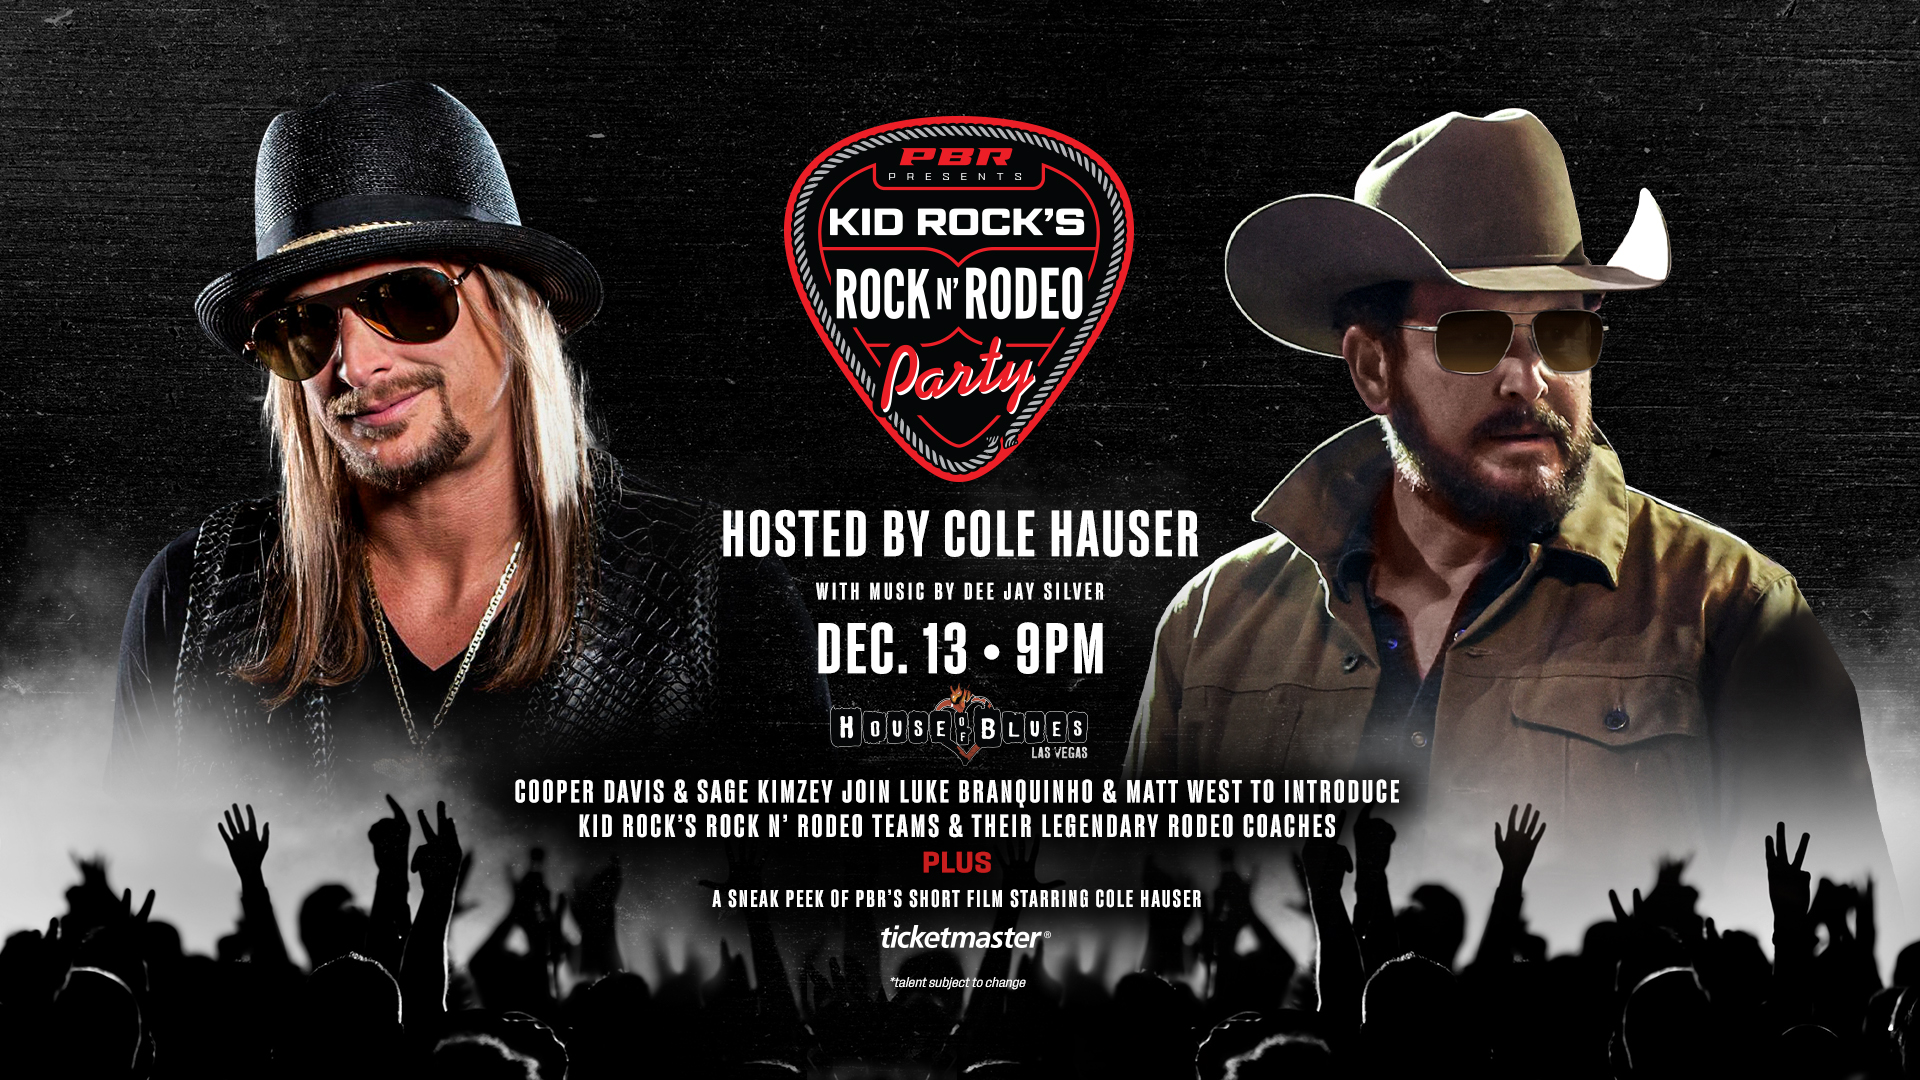 Kid Rock's Rock N' Rodeo to launch with exclusive party in Las Vegas hosted  by Cole Hauser on December 13, PBR